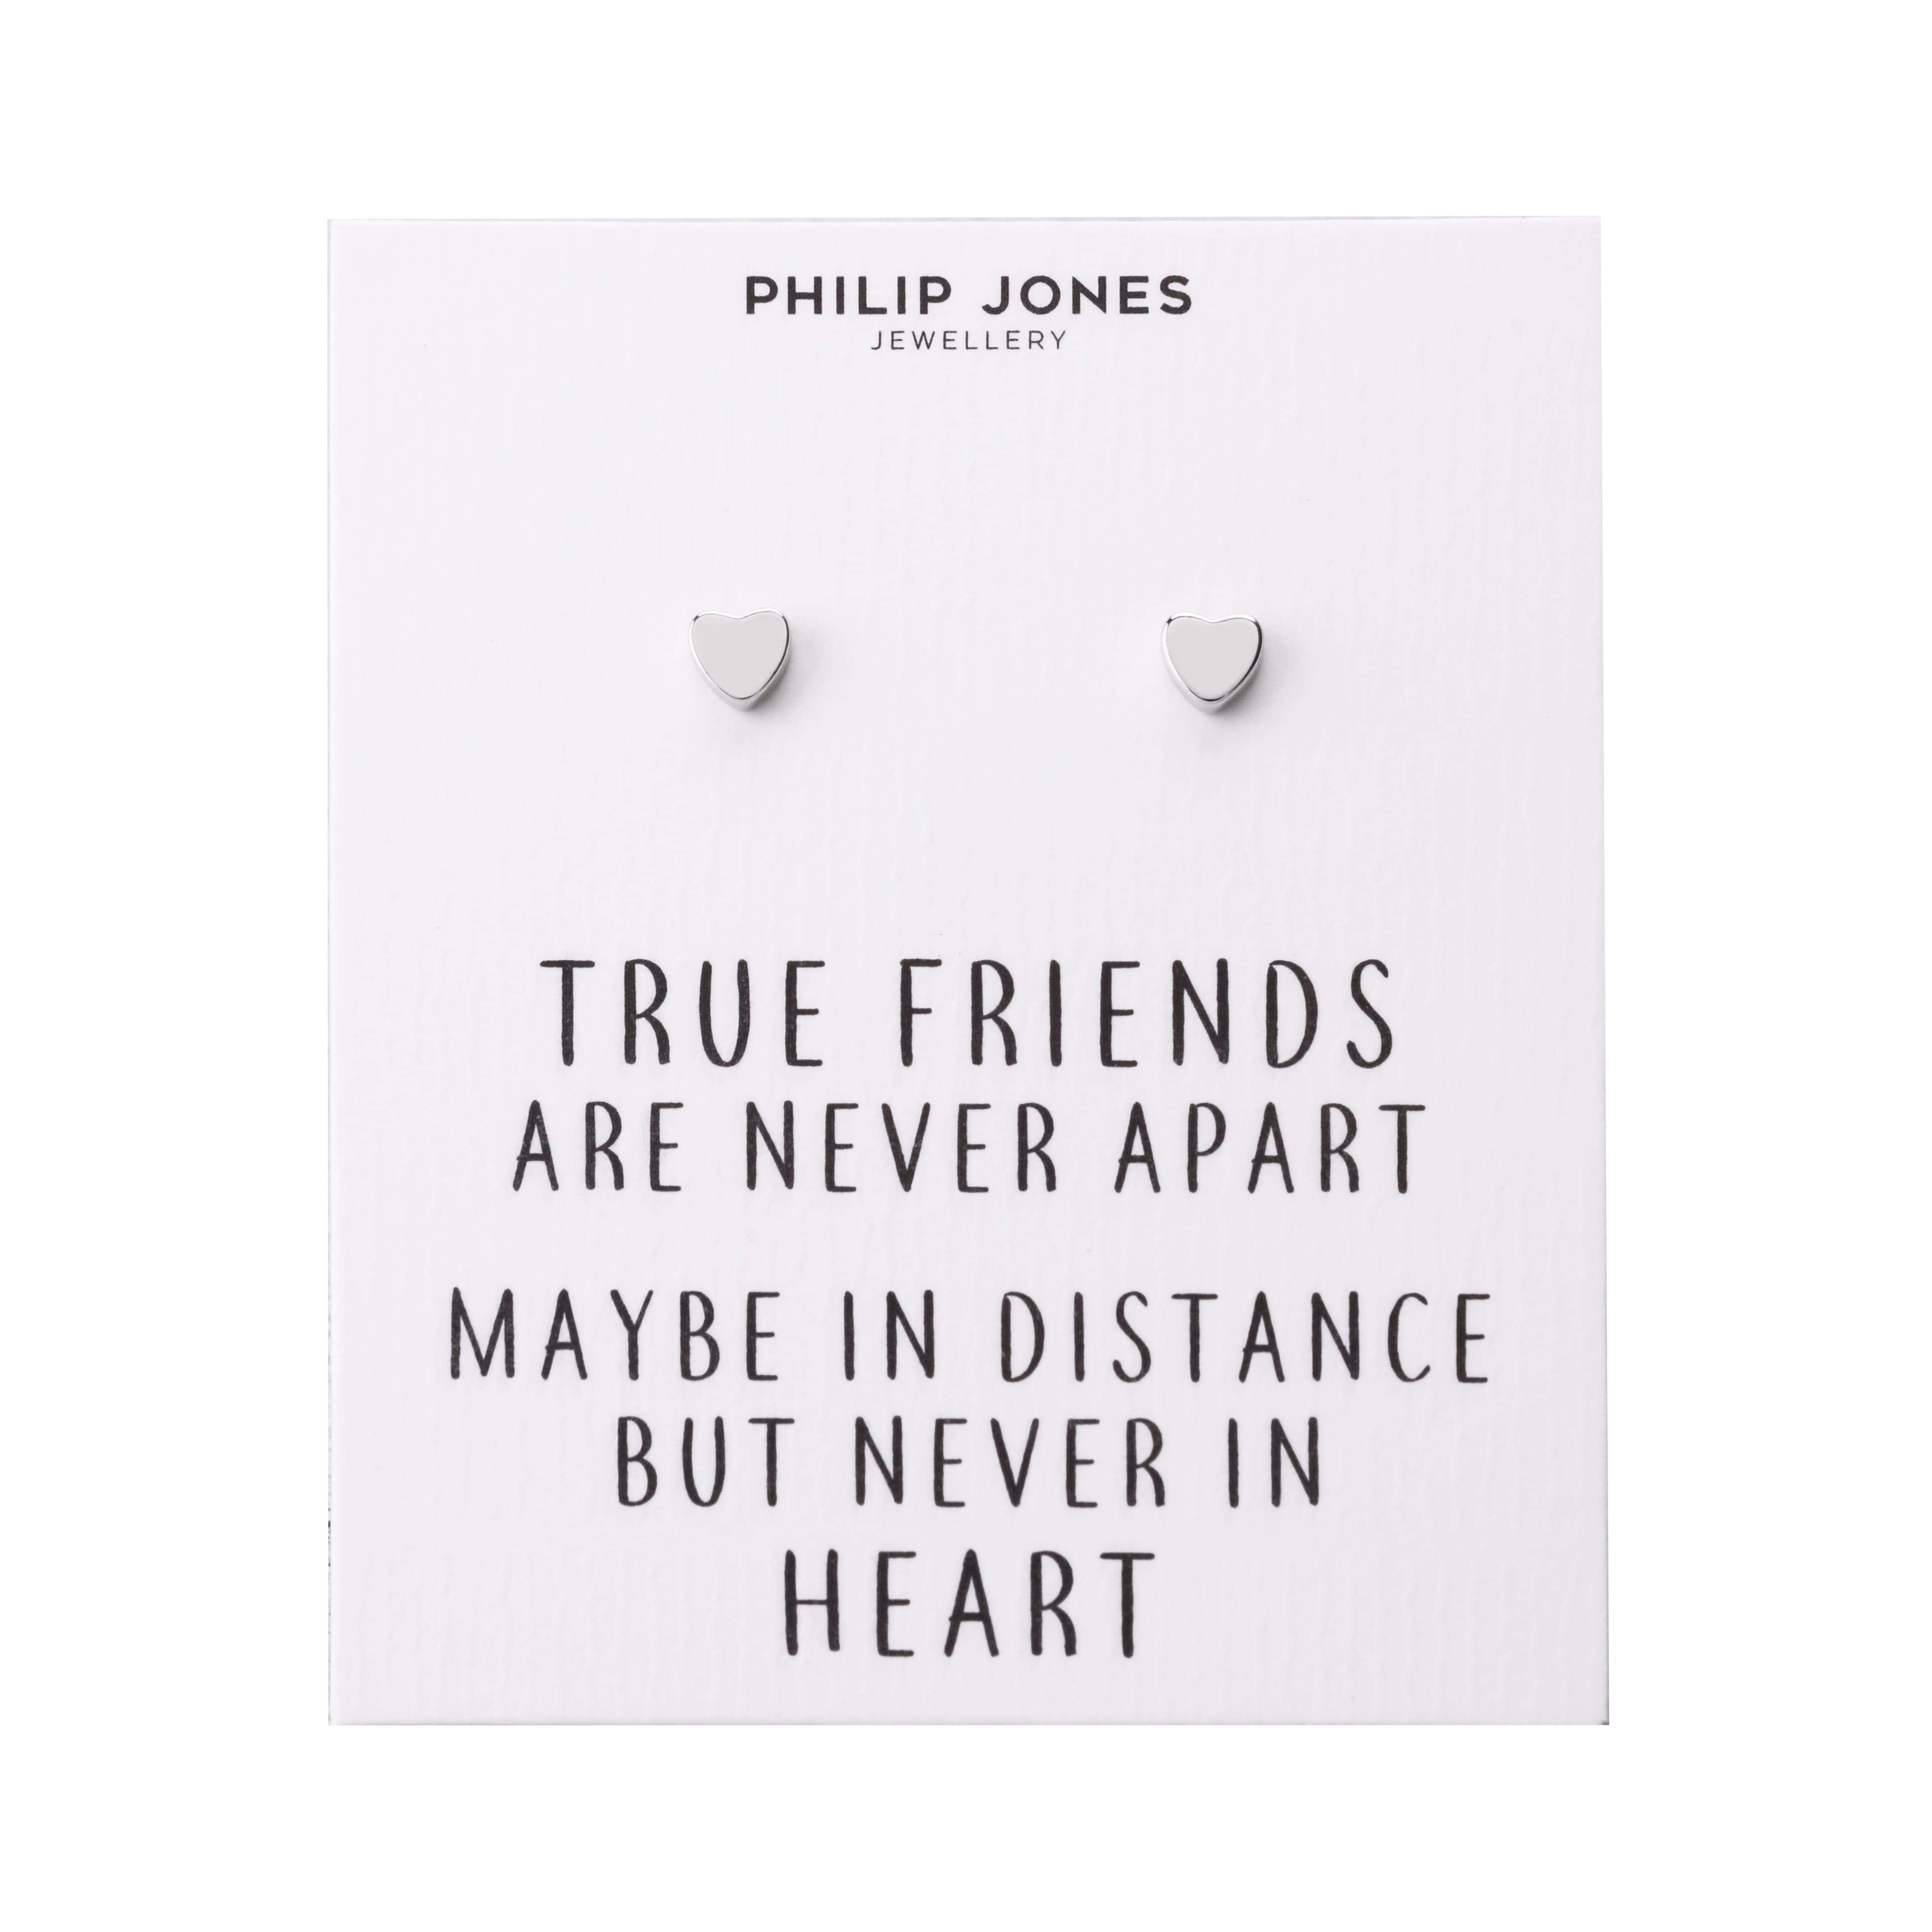 Silver Plated Heart Stud Earrings with Quote Card by Philip Jones Jewellery